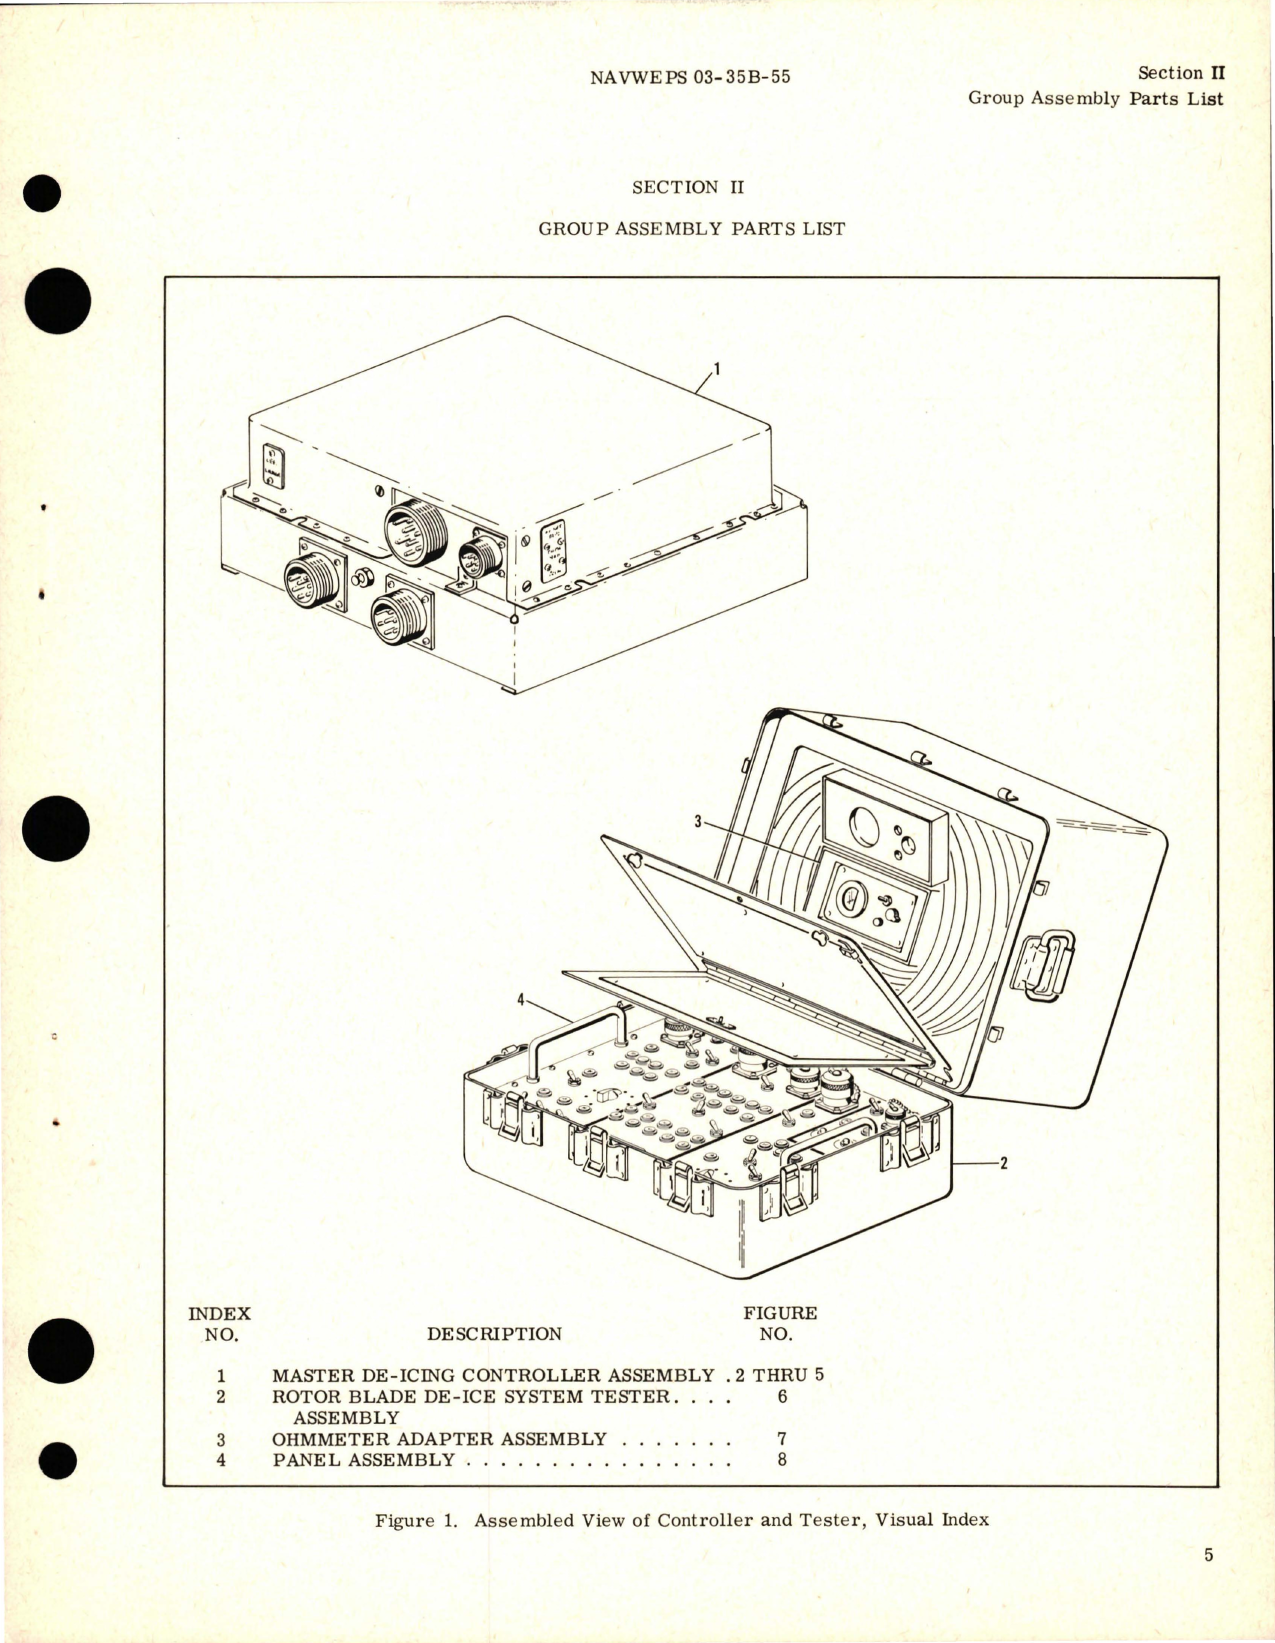 Sample page 7 from AirCorps Library document: Illustrated Parts Breakdown for Master De-Icing Controller and Rotary Blade De-Ice System Tester